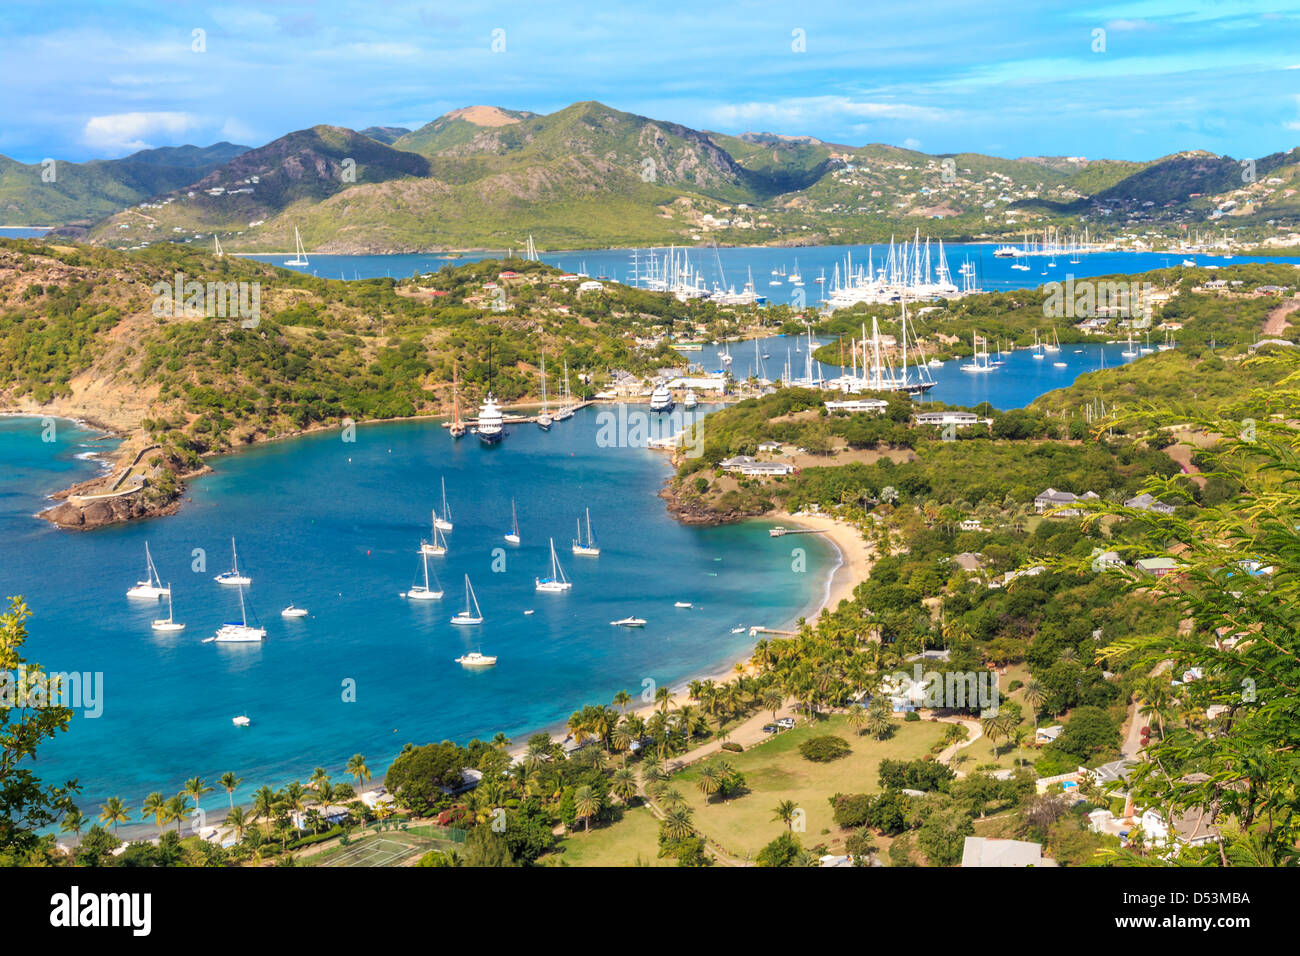 Antigua Bay, view from Shirely Heights, Antigua, West Indies, Caribbean Stock Photo